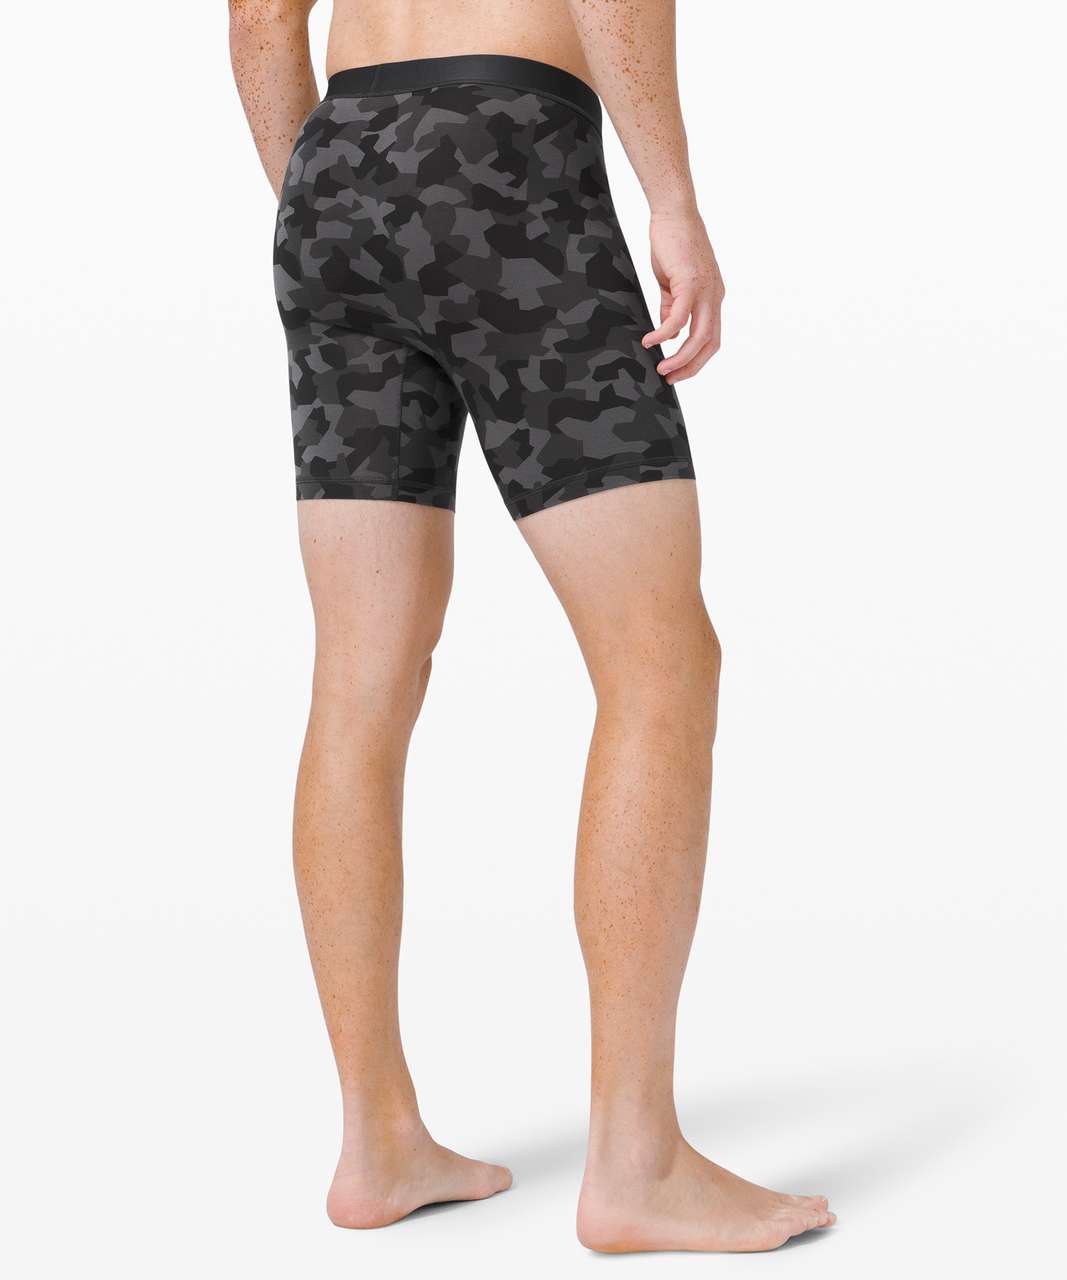 Lululemon Always In Motion Boxer *The Long One 7" - Geo Camo Micro Coal Obsidian